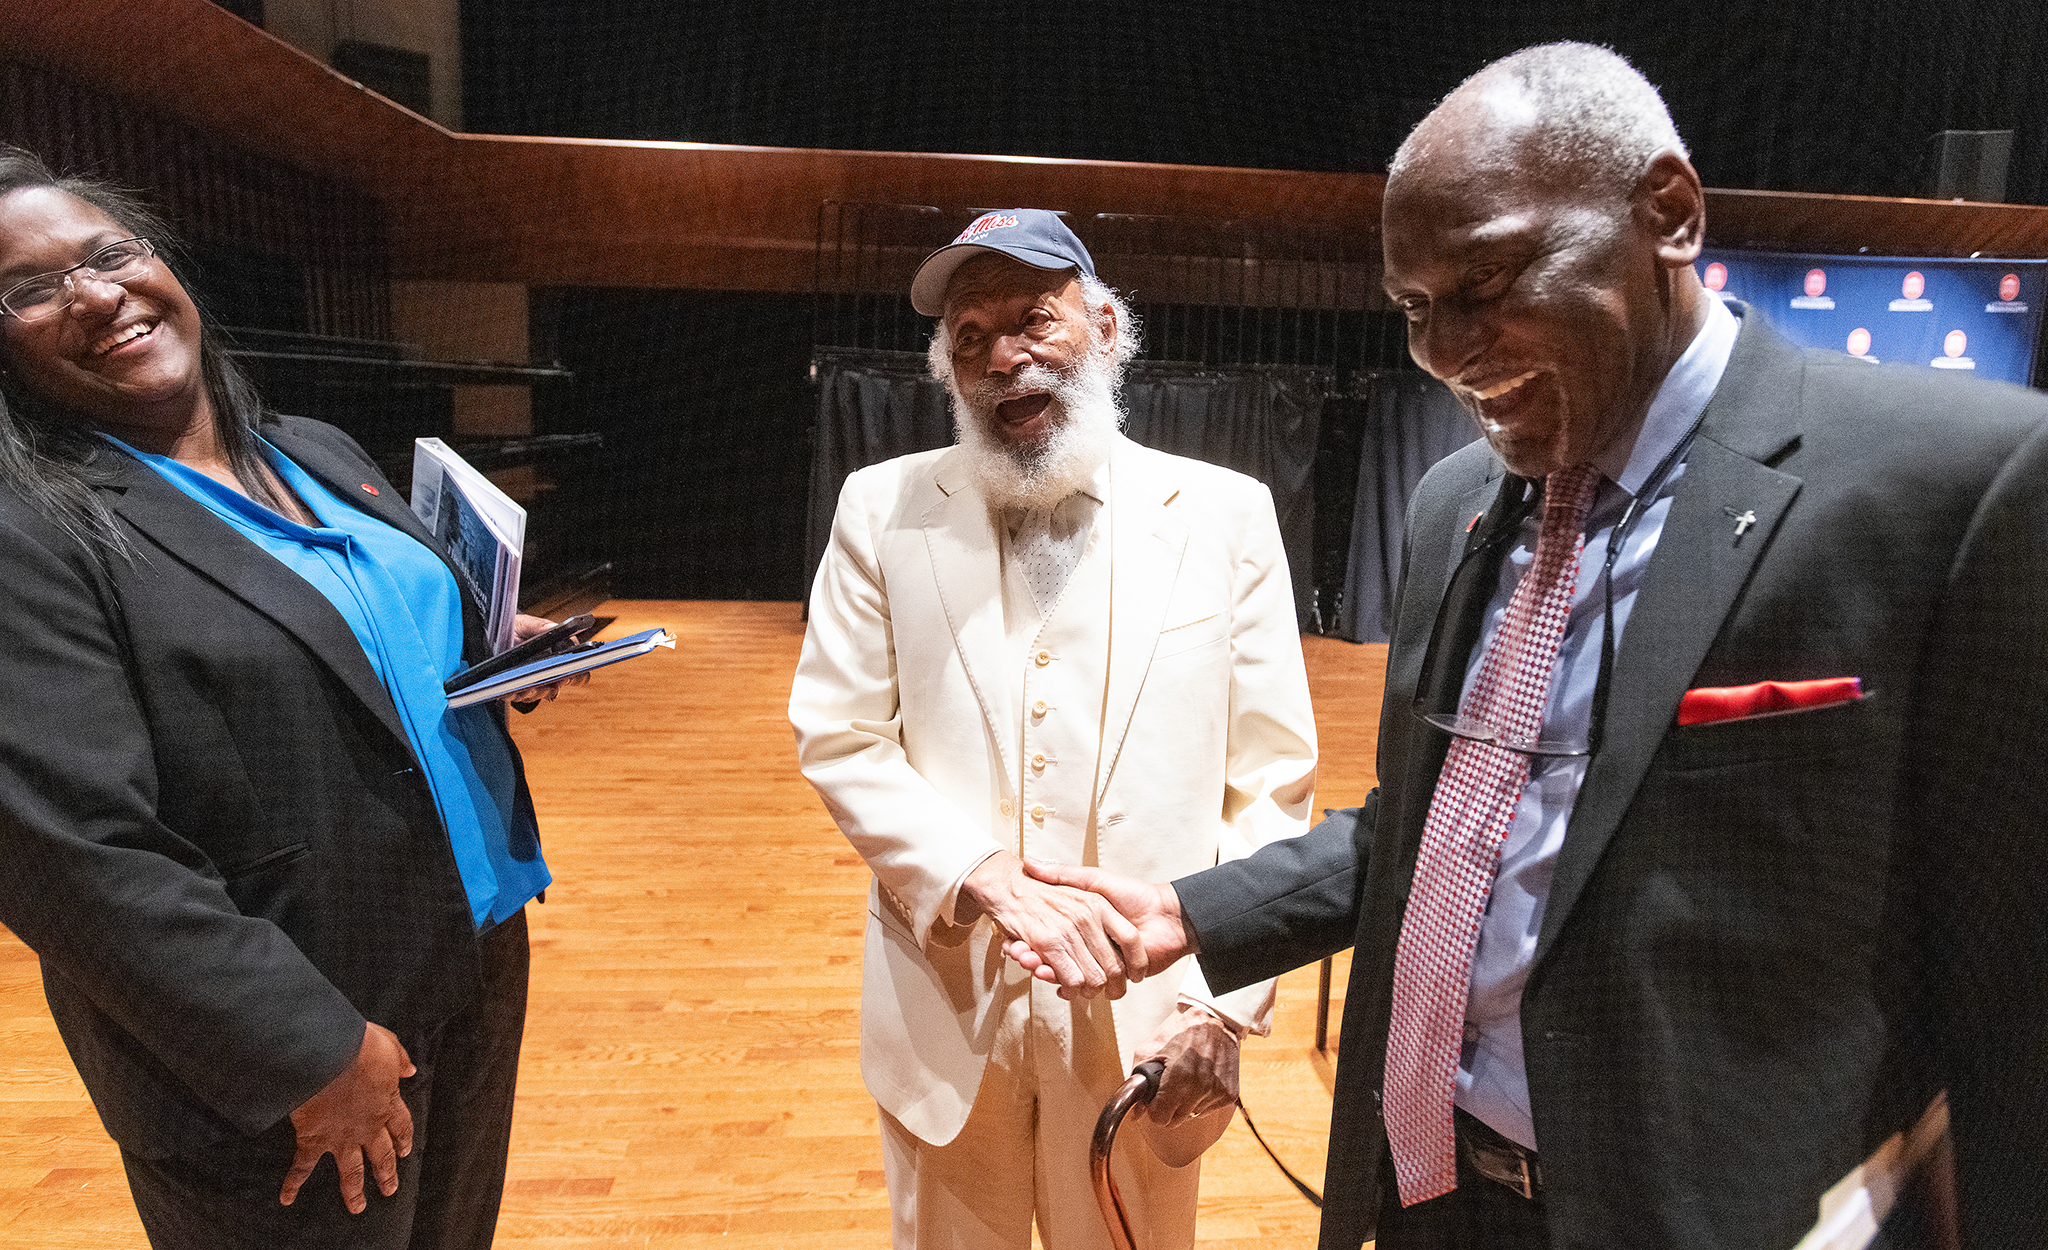 James Meredith (center) shares a moment with Shawnboda Mead (left), vice chancellor for diversity and inclusion; and Donald Cole, special assistant to the chancellor for multicultural affairs emeritus, following an event in the university’s observance of its 60th anniversary of integration. Meredith and his family will be on hand April 11 for the Honoring Excellence in Diversity Awards ceremony, one of the final events in the anniversary series. Photo by Thomas Graning/Ole Miss Digital Imaging Services